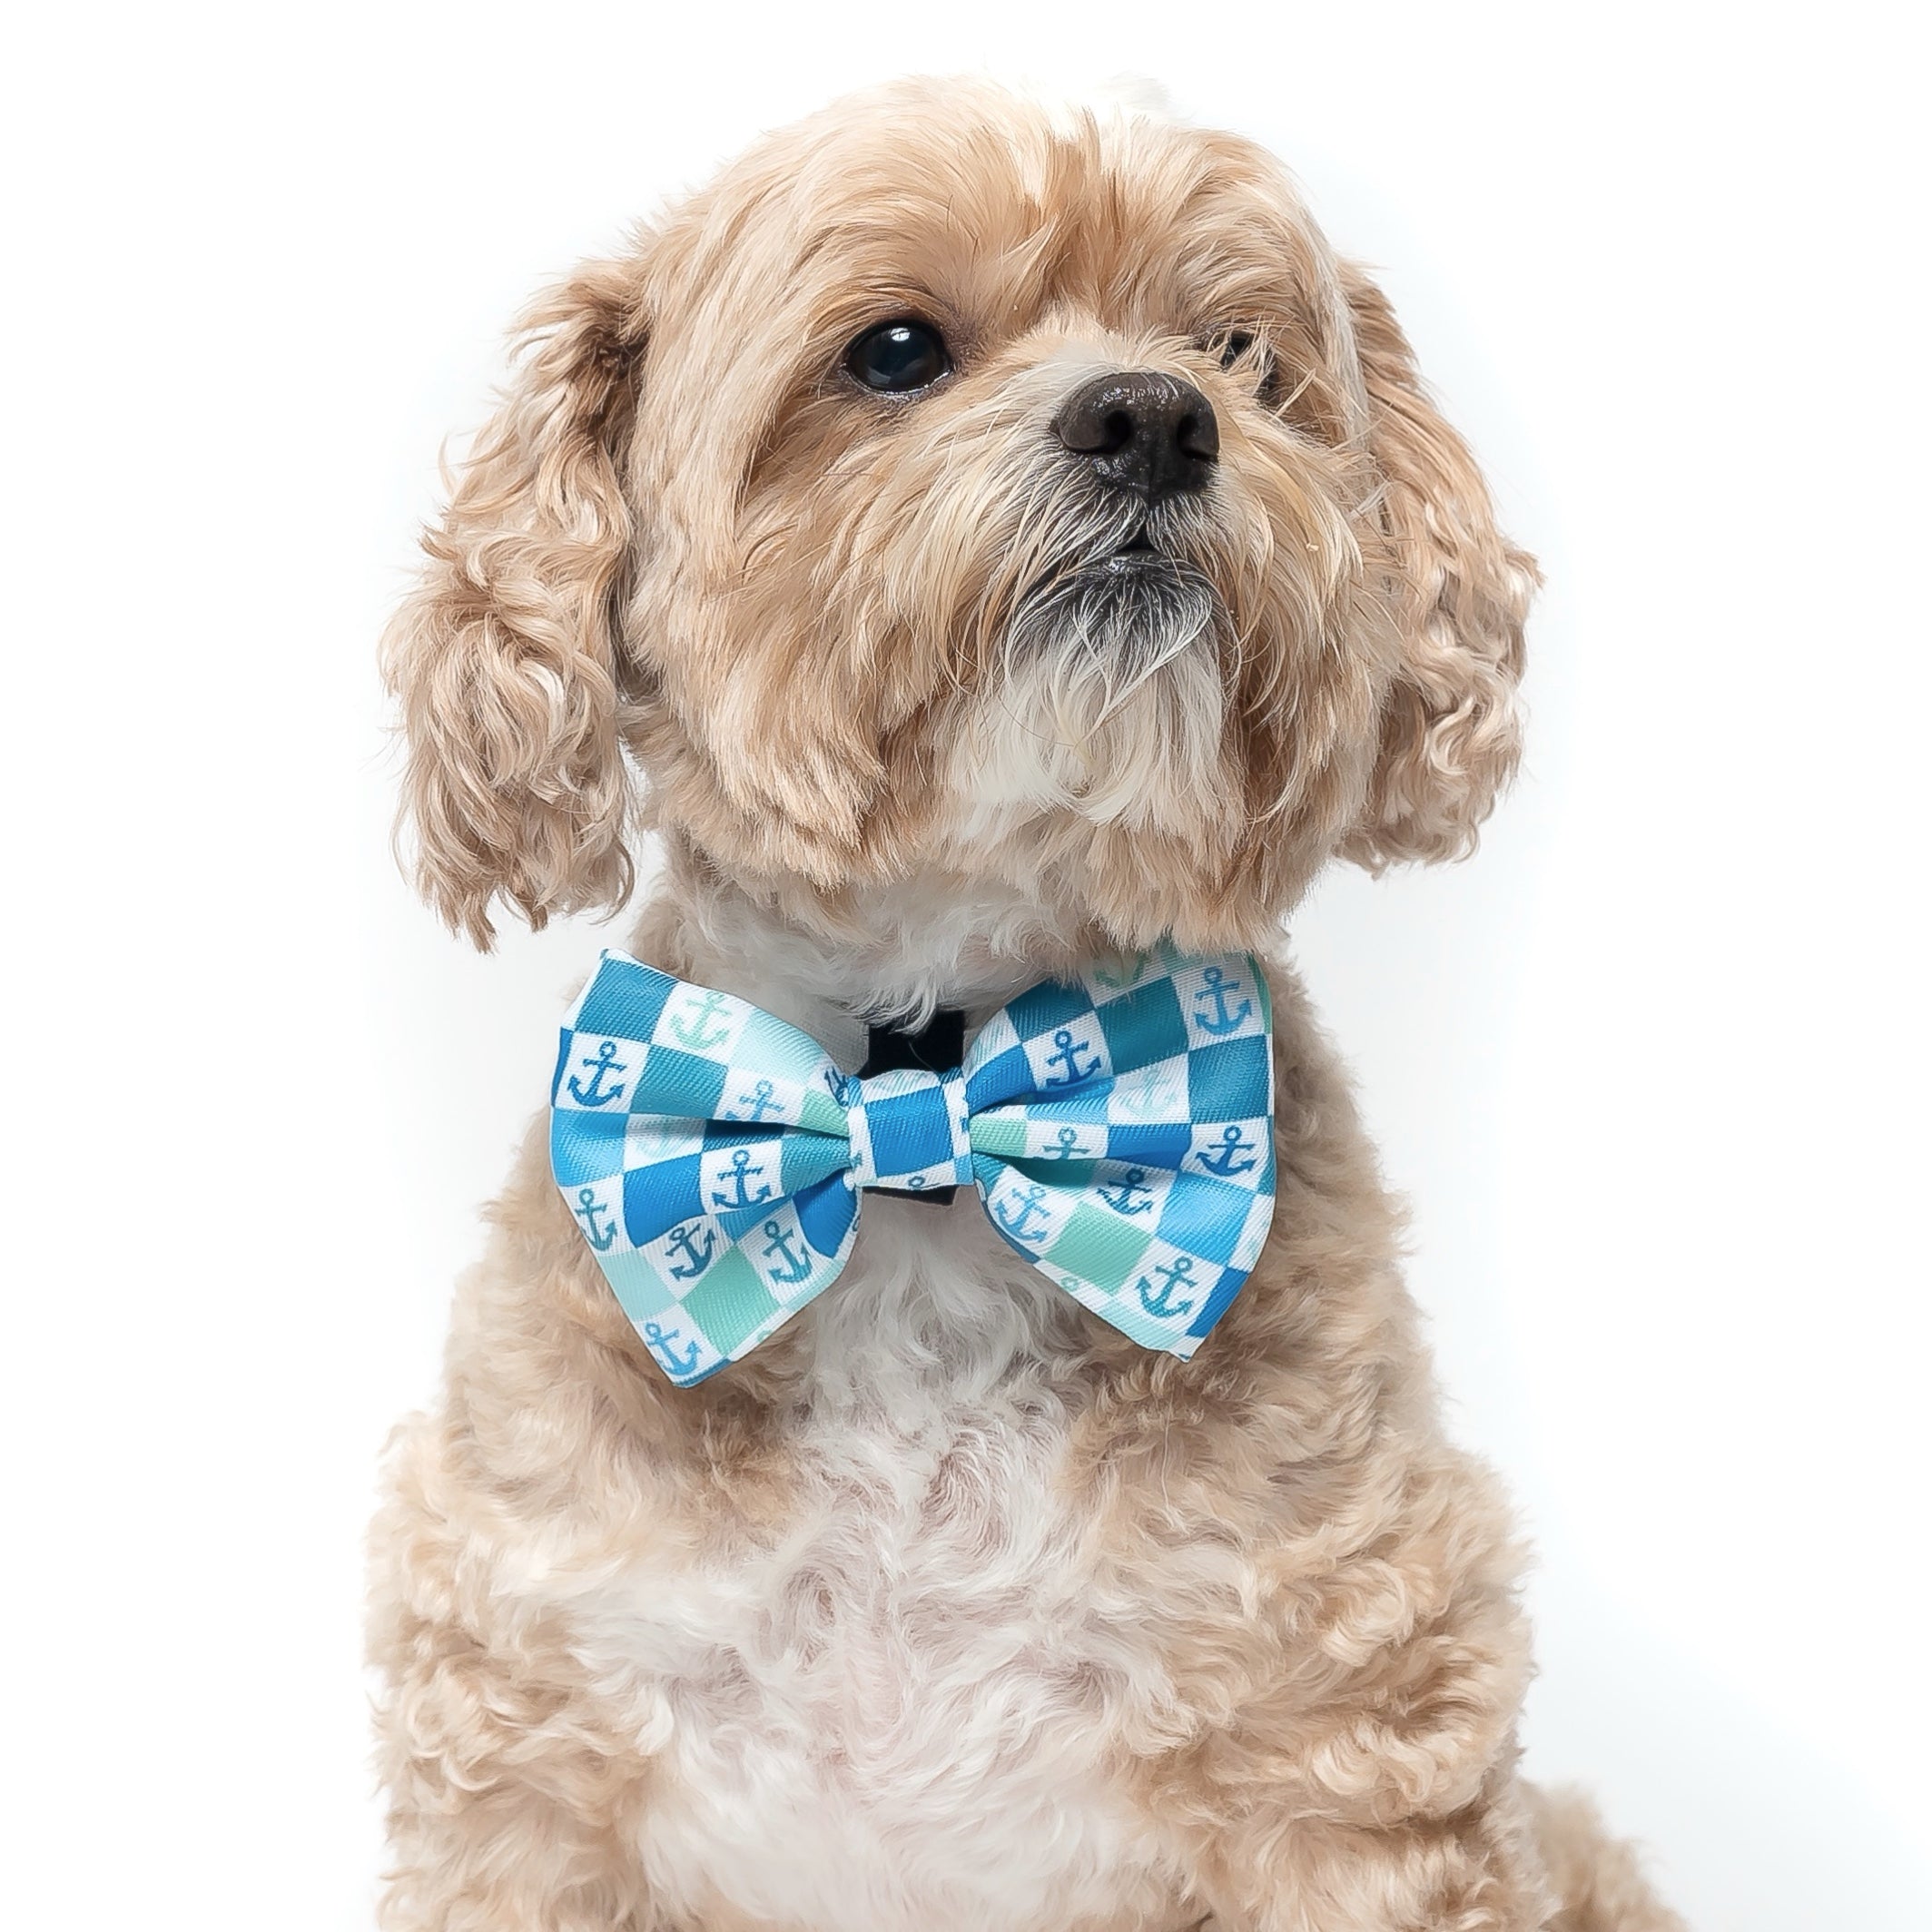 Bow Tie for Dog Collar Attaches With Hook-and-loop Fastener 